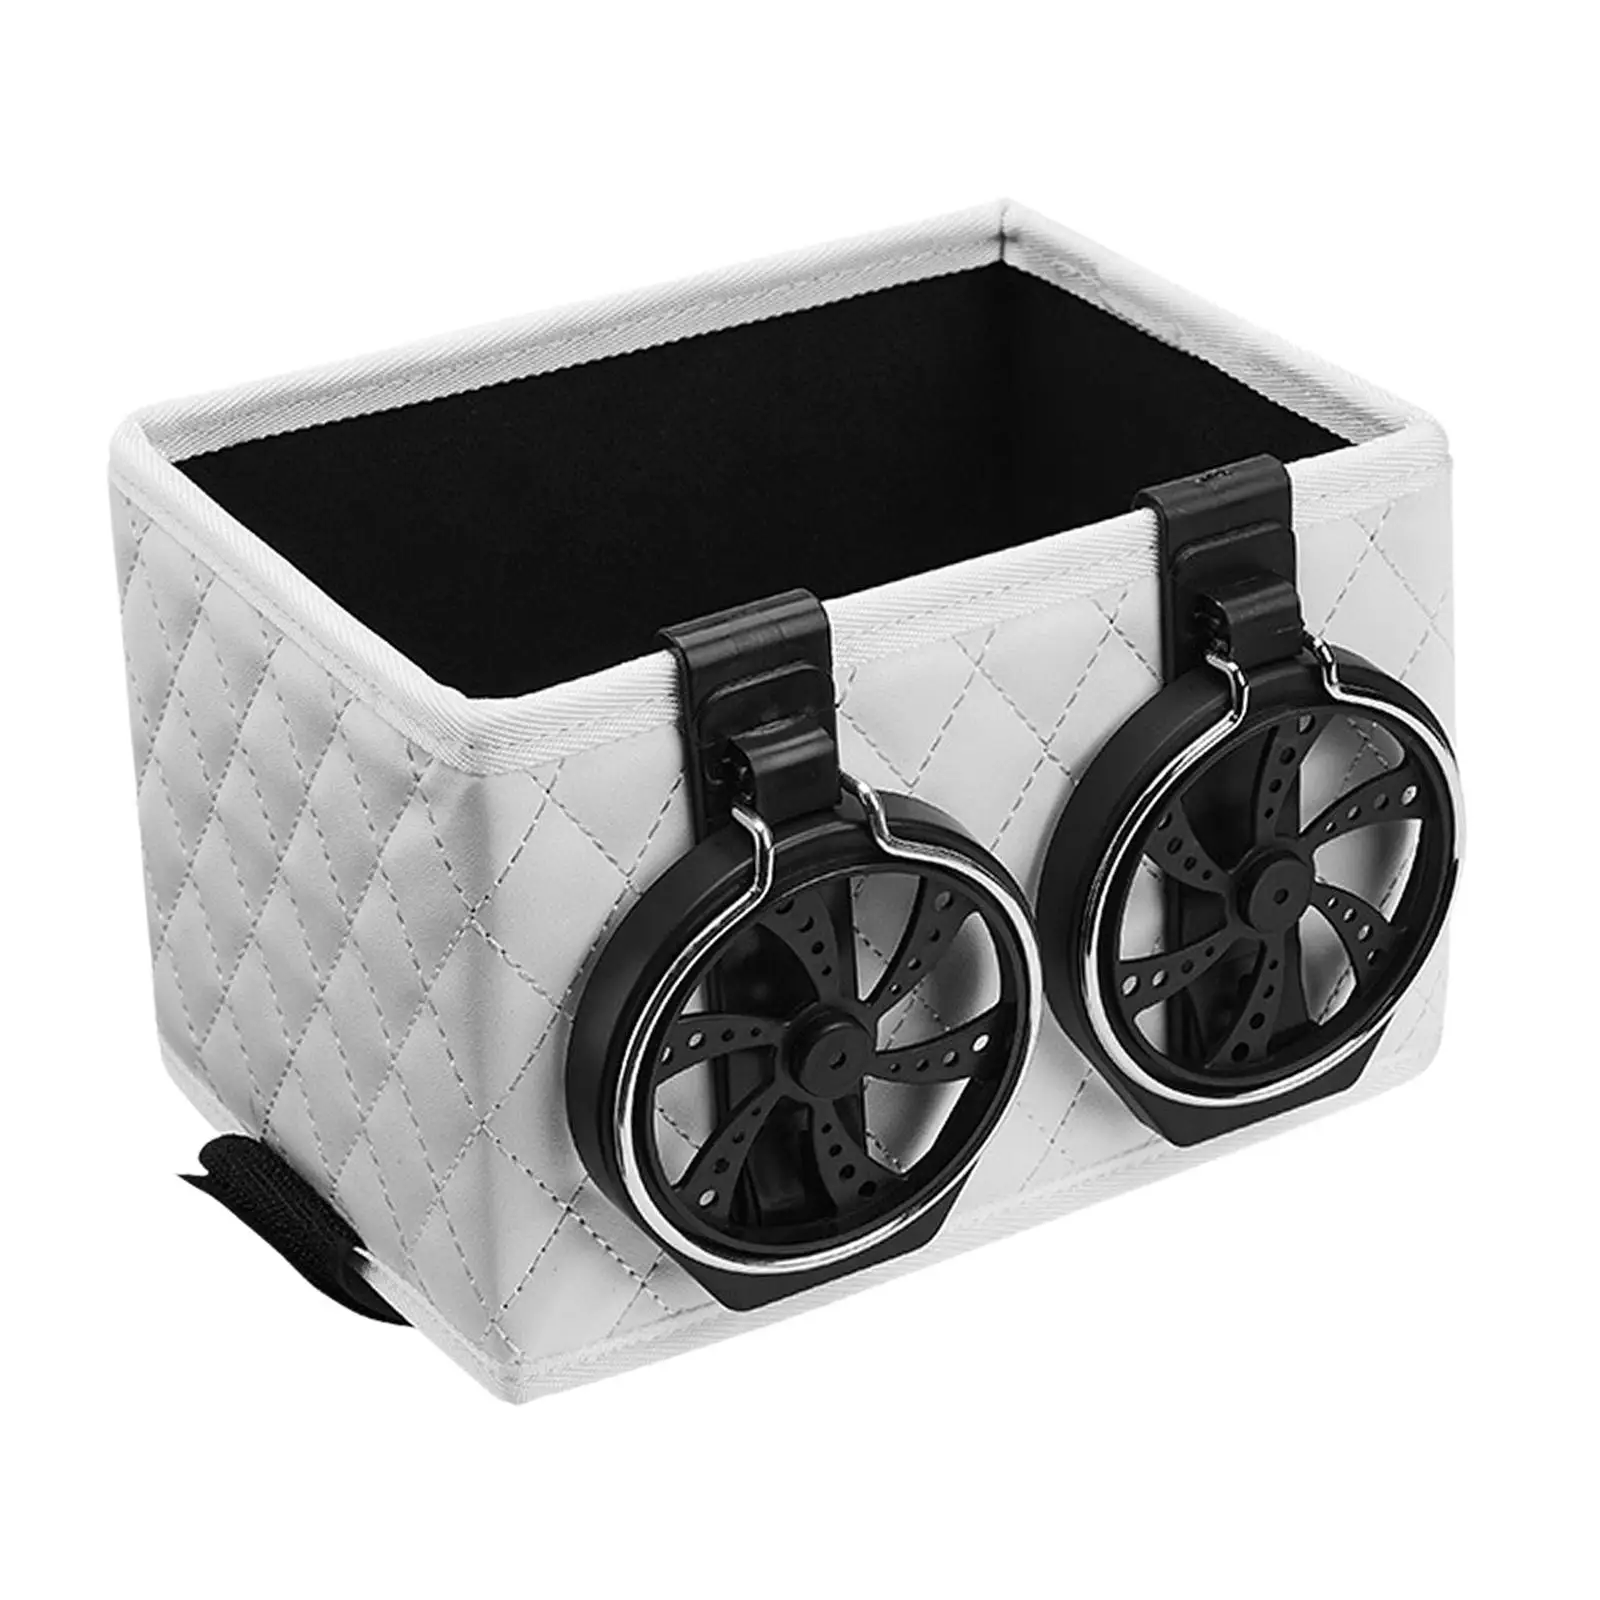 cup Holder Car Seat Crevice Storage Tissue Box Foldable Car Armrest Storage Box paper Box for Paper Towels